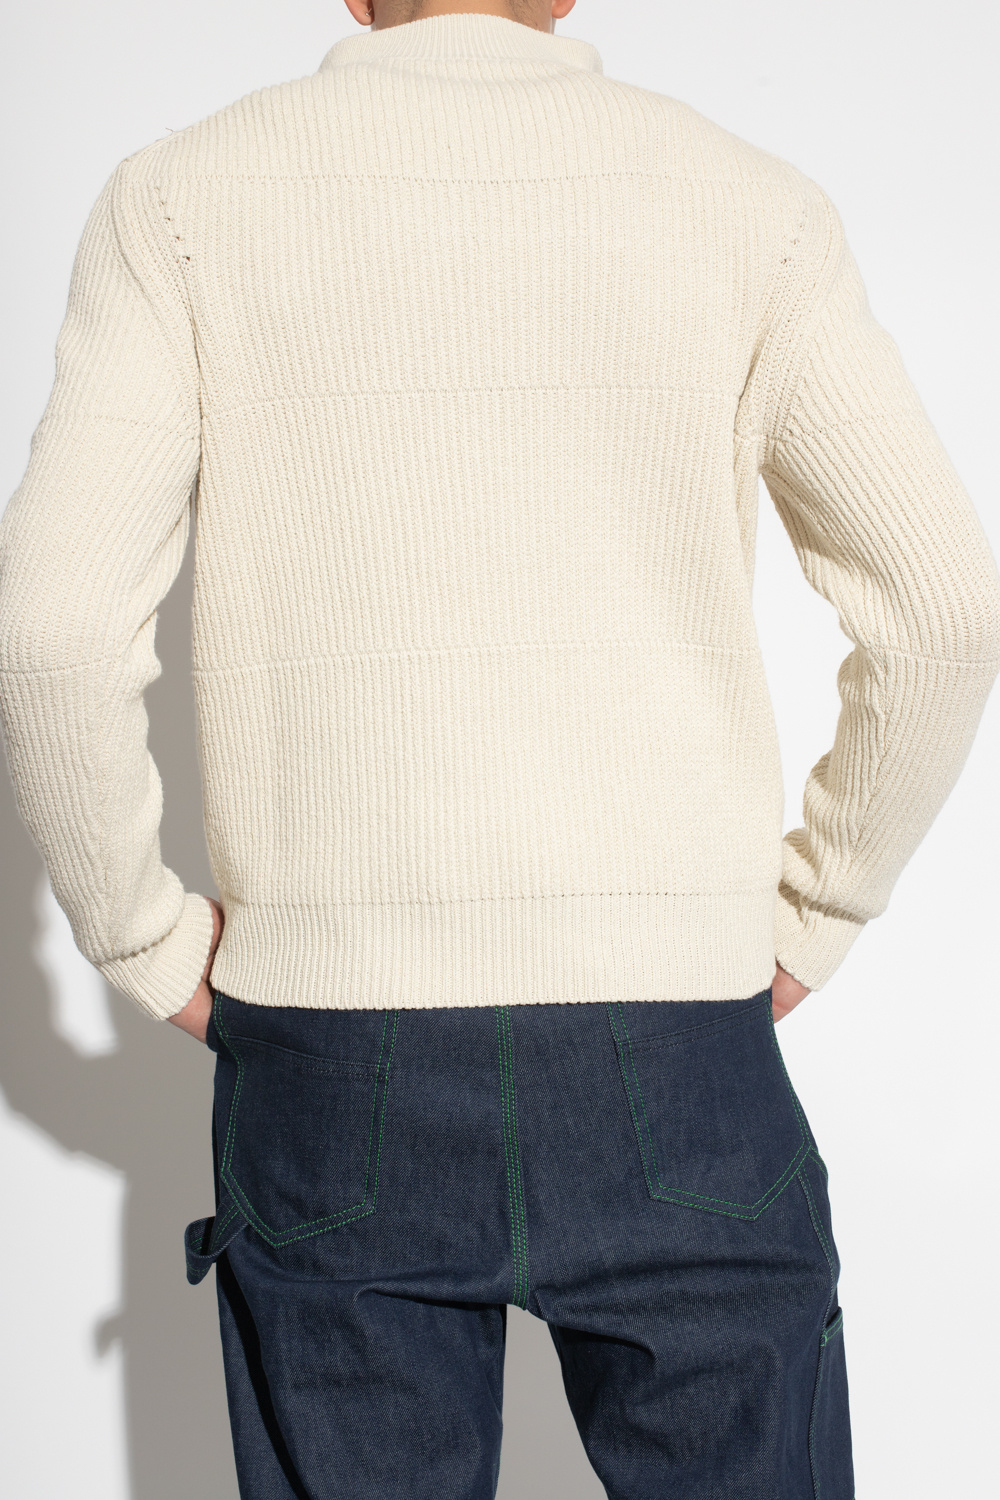 Jacquemus ‘Doce’ sweater Portugal with standing collar